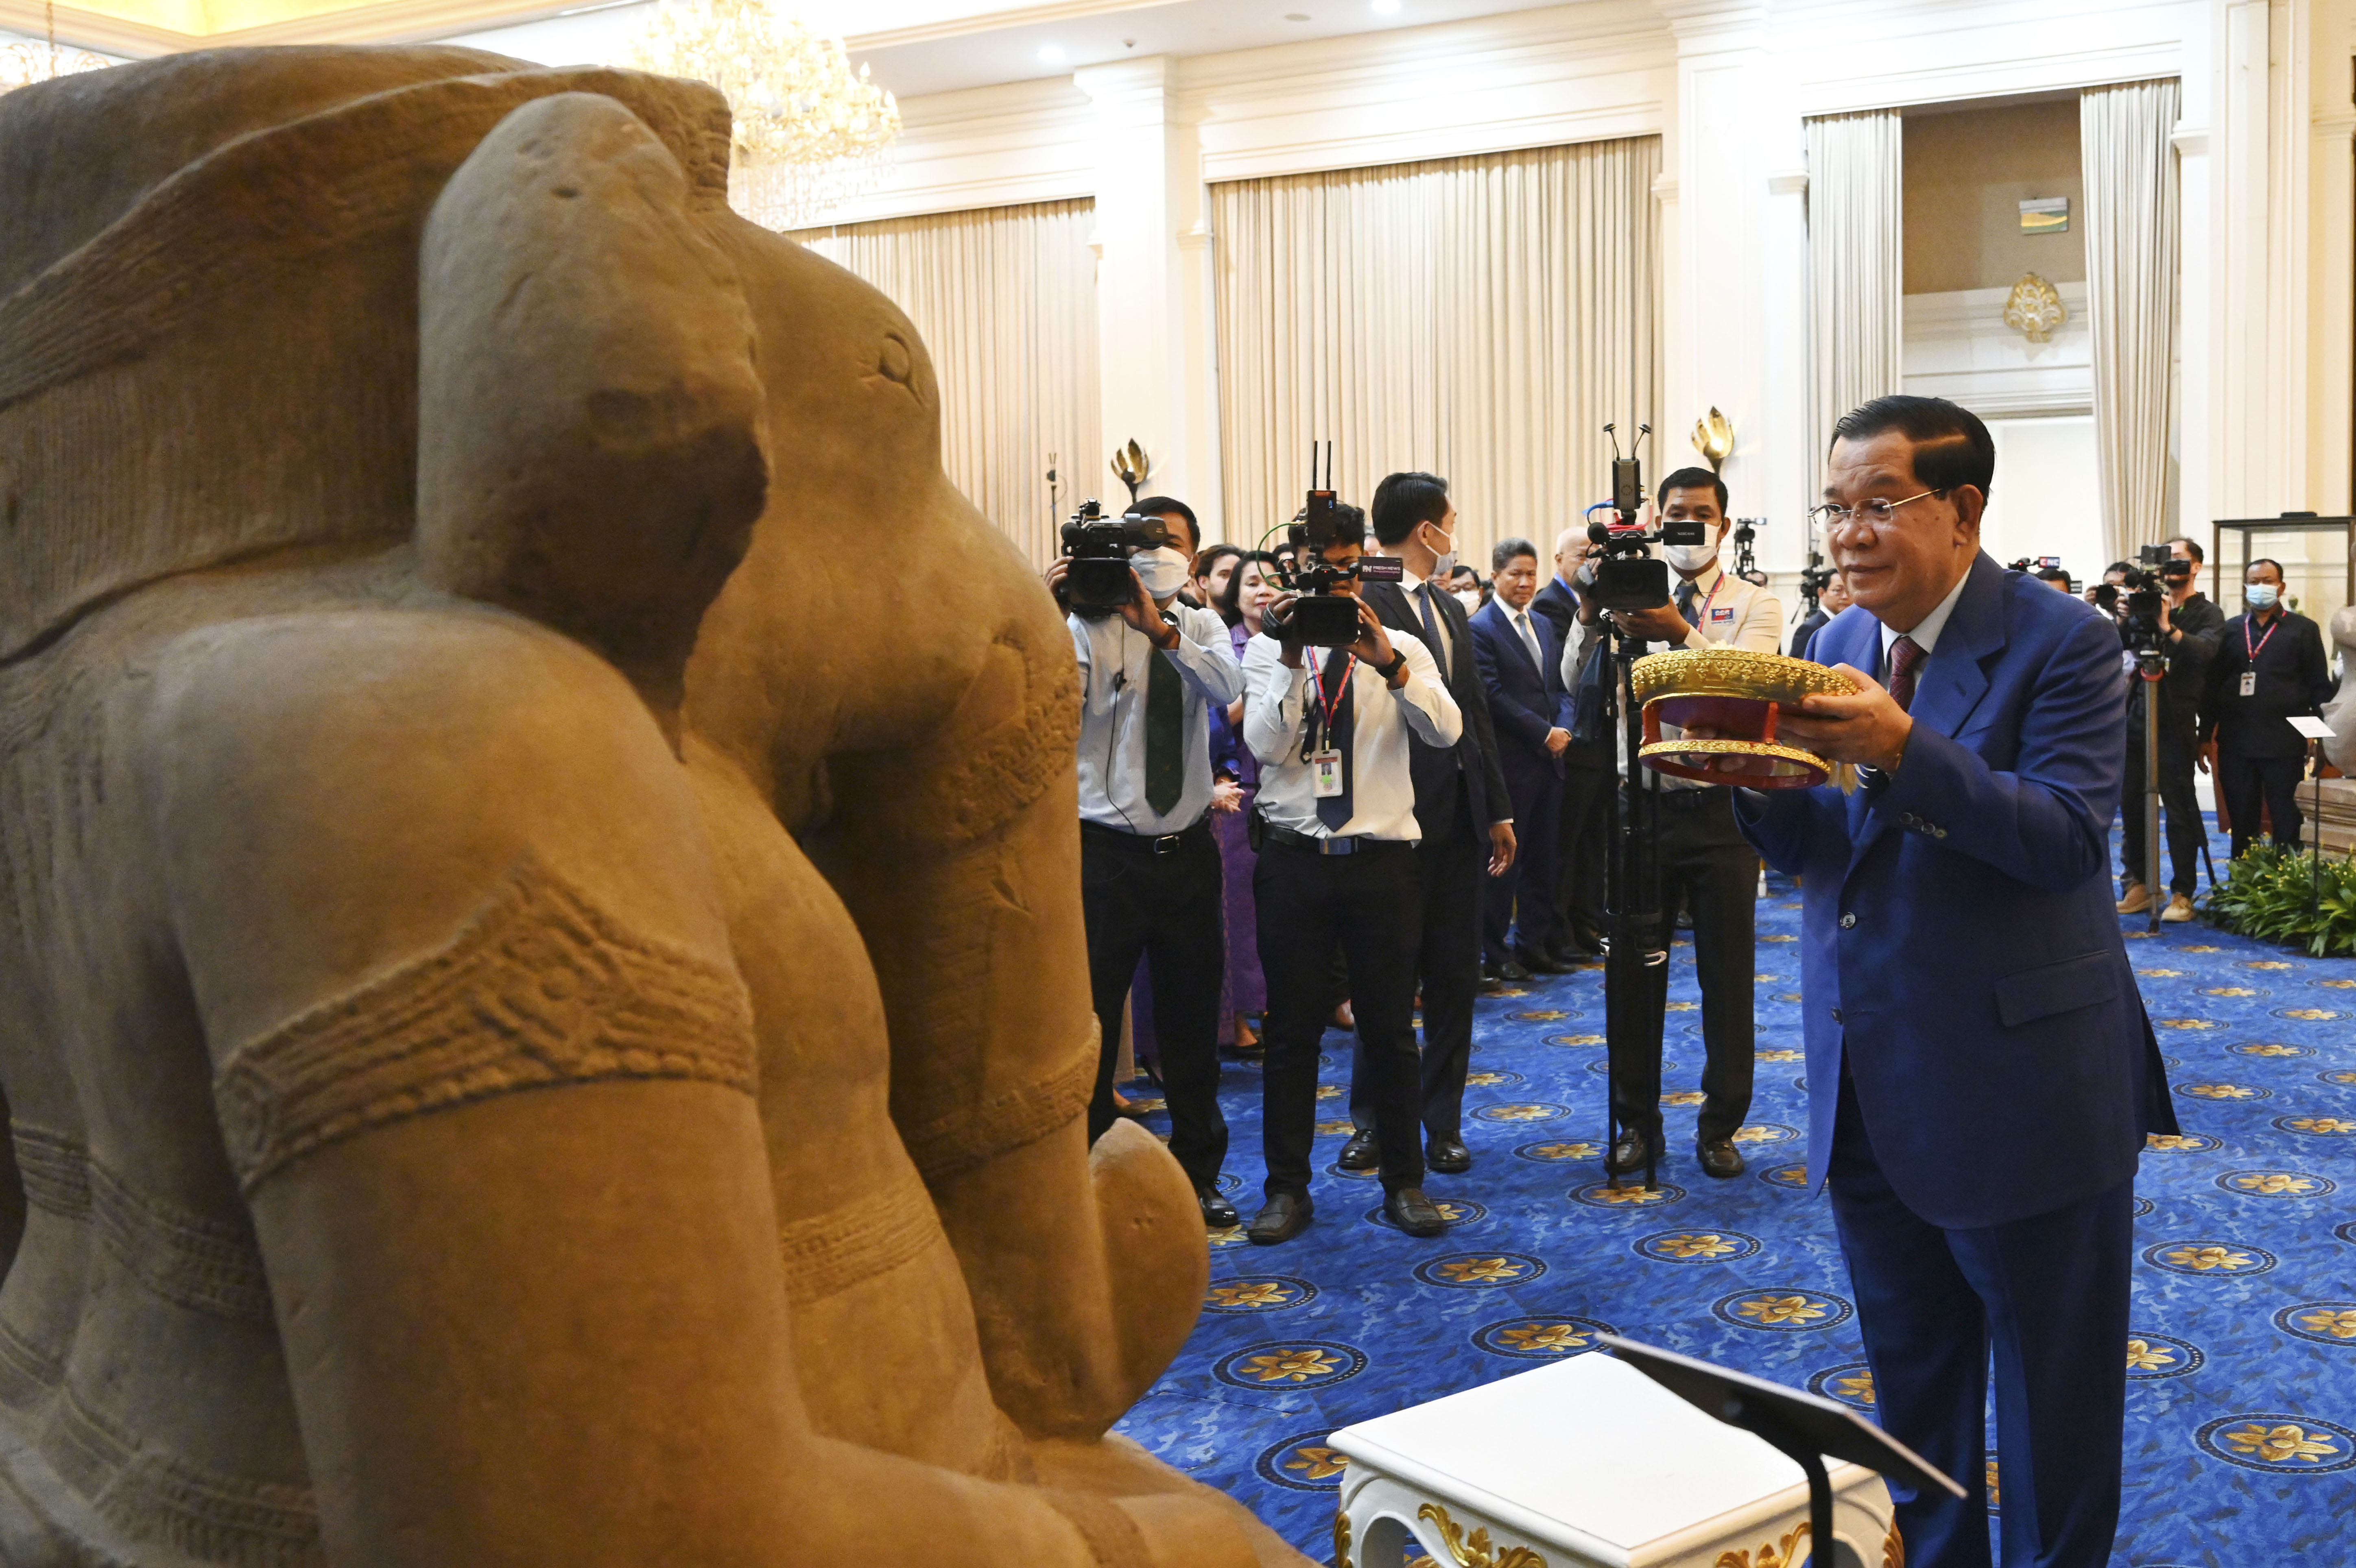 Cambodian Prime Minister Hun Sen, right, prays in front of a sandstone statue of Ganesha, at Peace Palace, in Phnom Penh, Cambodia, Friday, March 17, 2023. 